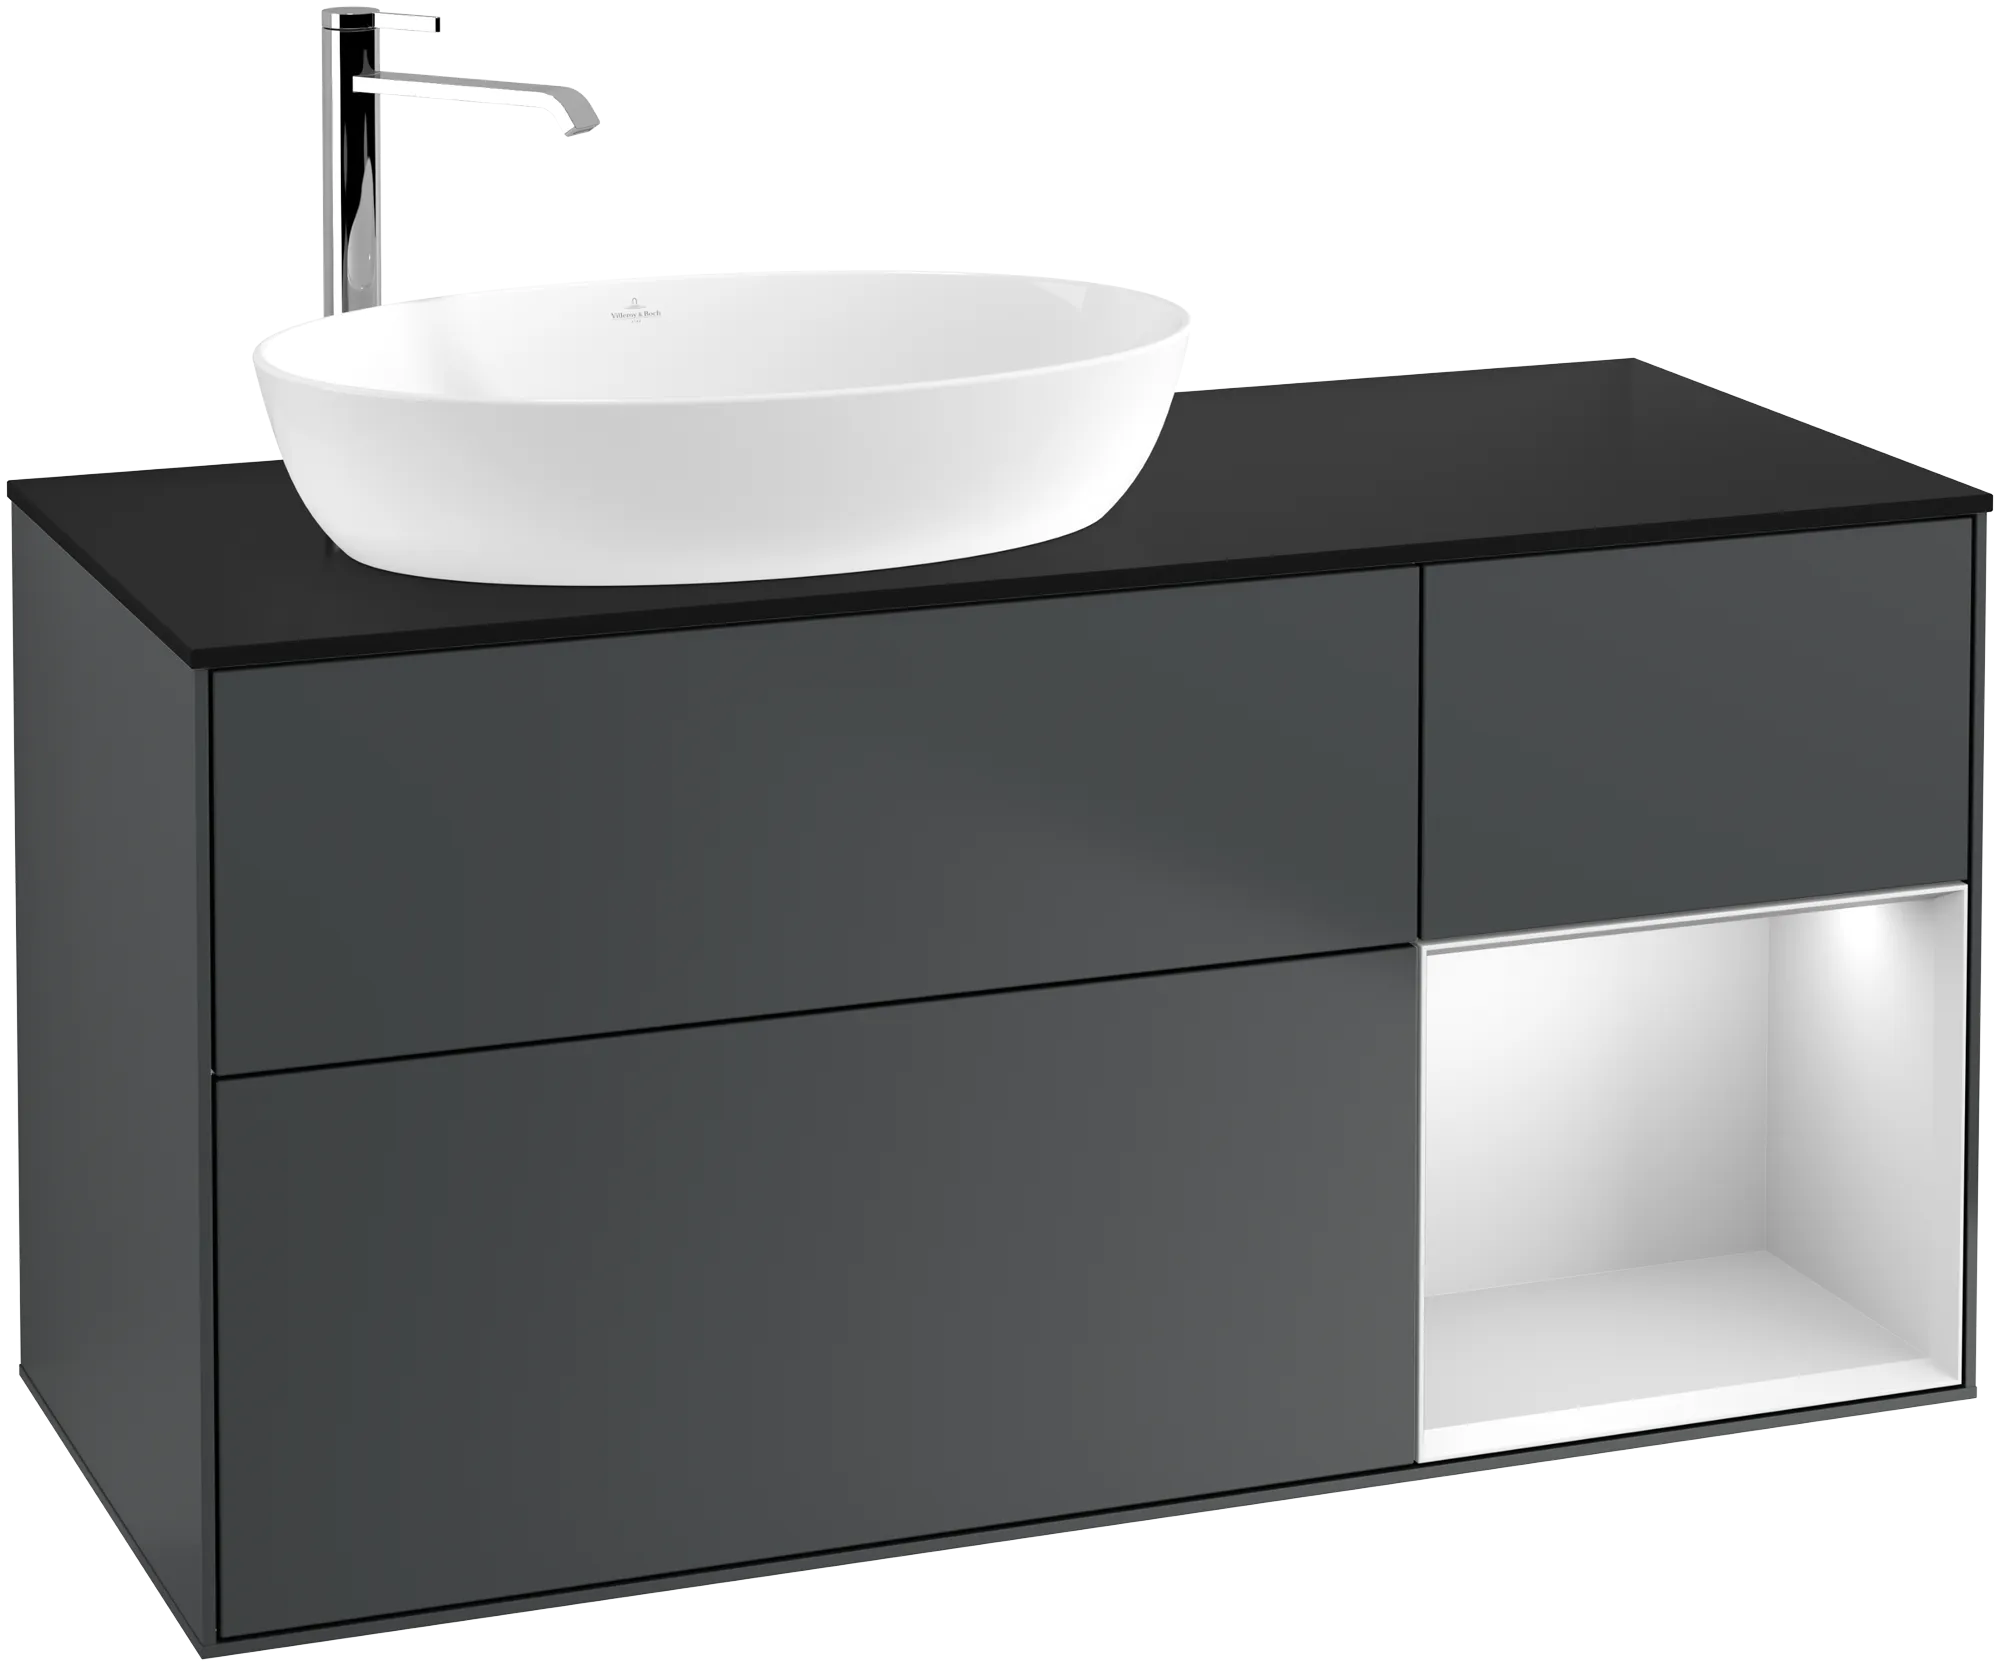 Picture of VILLEROY BOCH Finion Vanity unit, with lighting, 3 pull-out compartments, 1200 x 603 x 501 mm, Midnight Blue Matt Lacquer / White Matt Lacquer / Glass Black Matt #G932MTHG